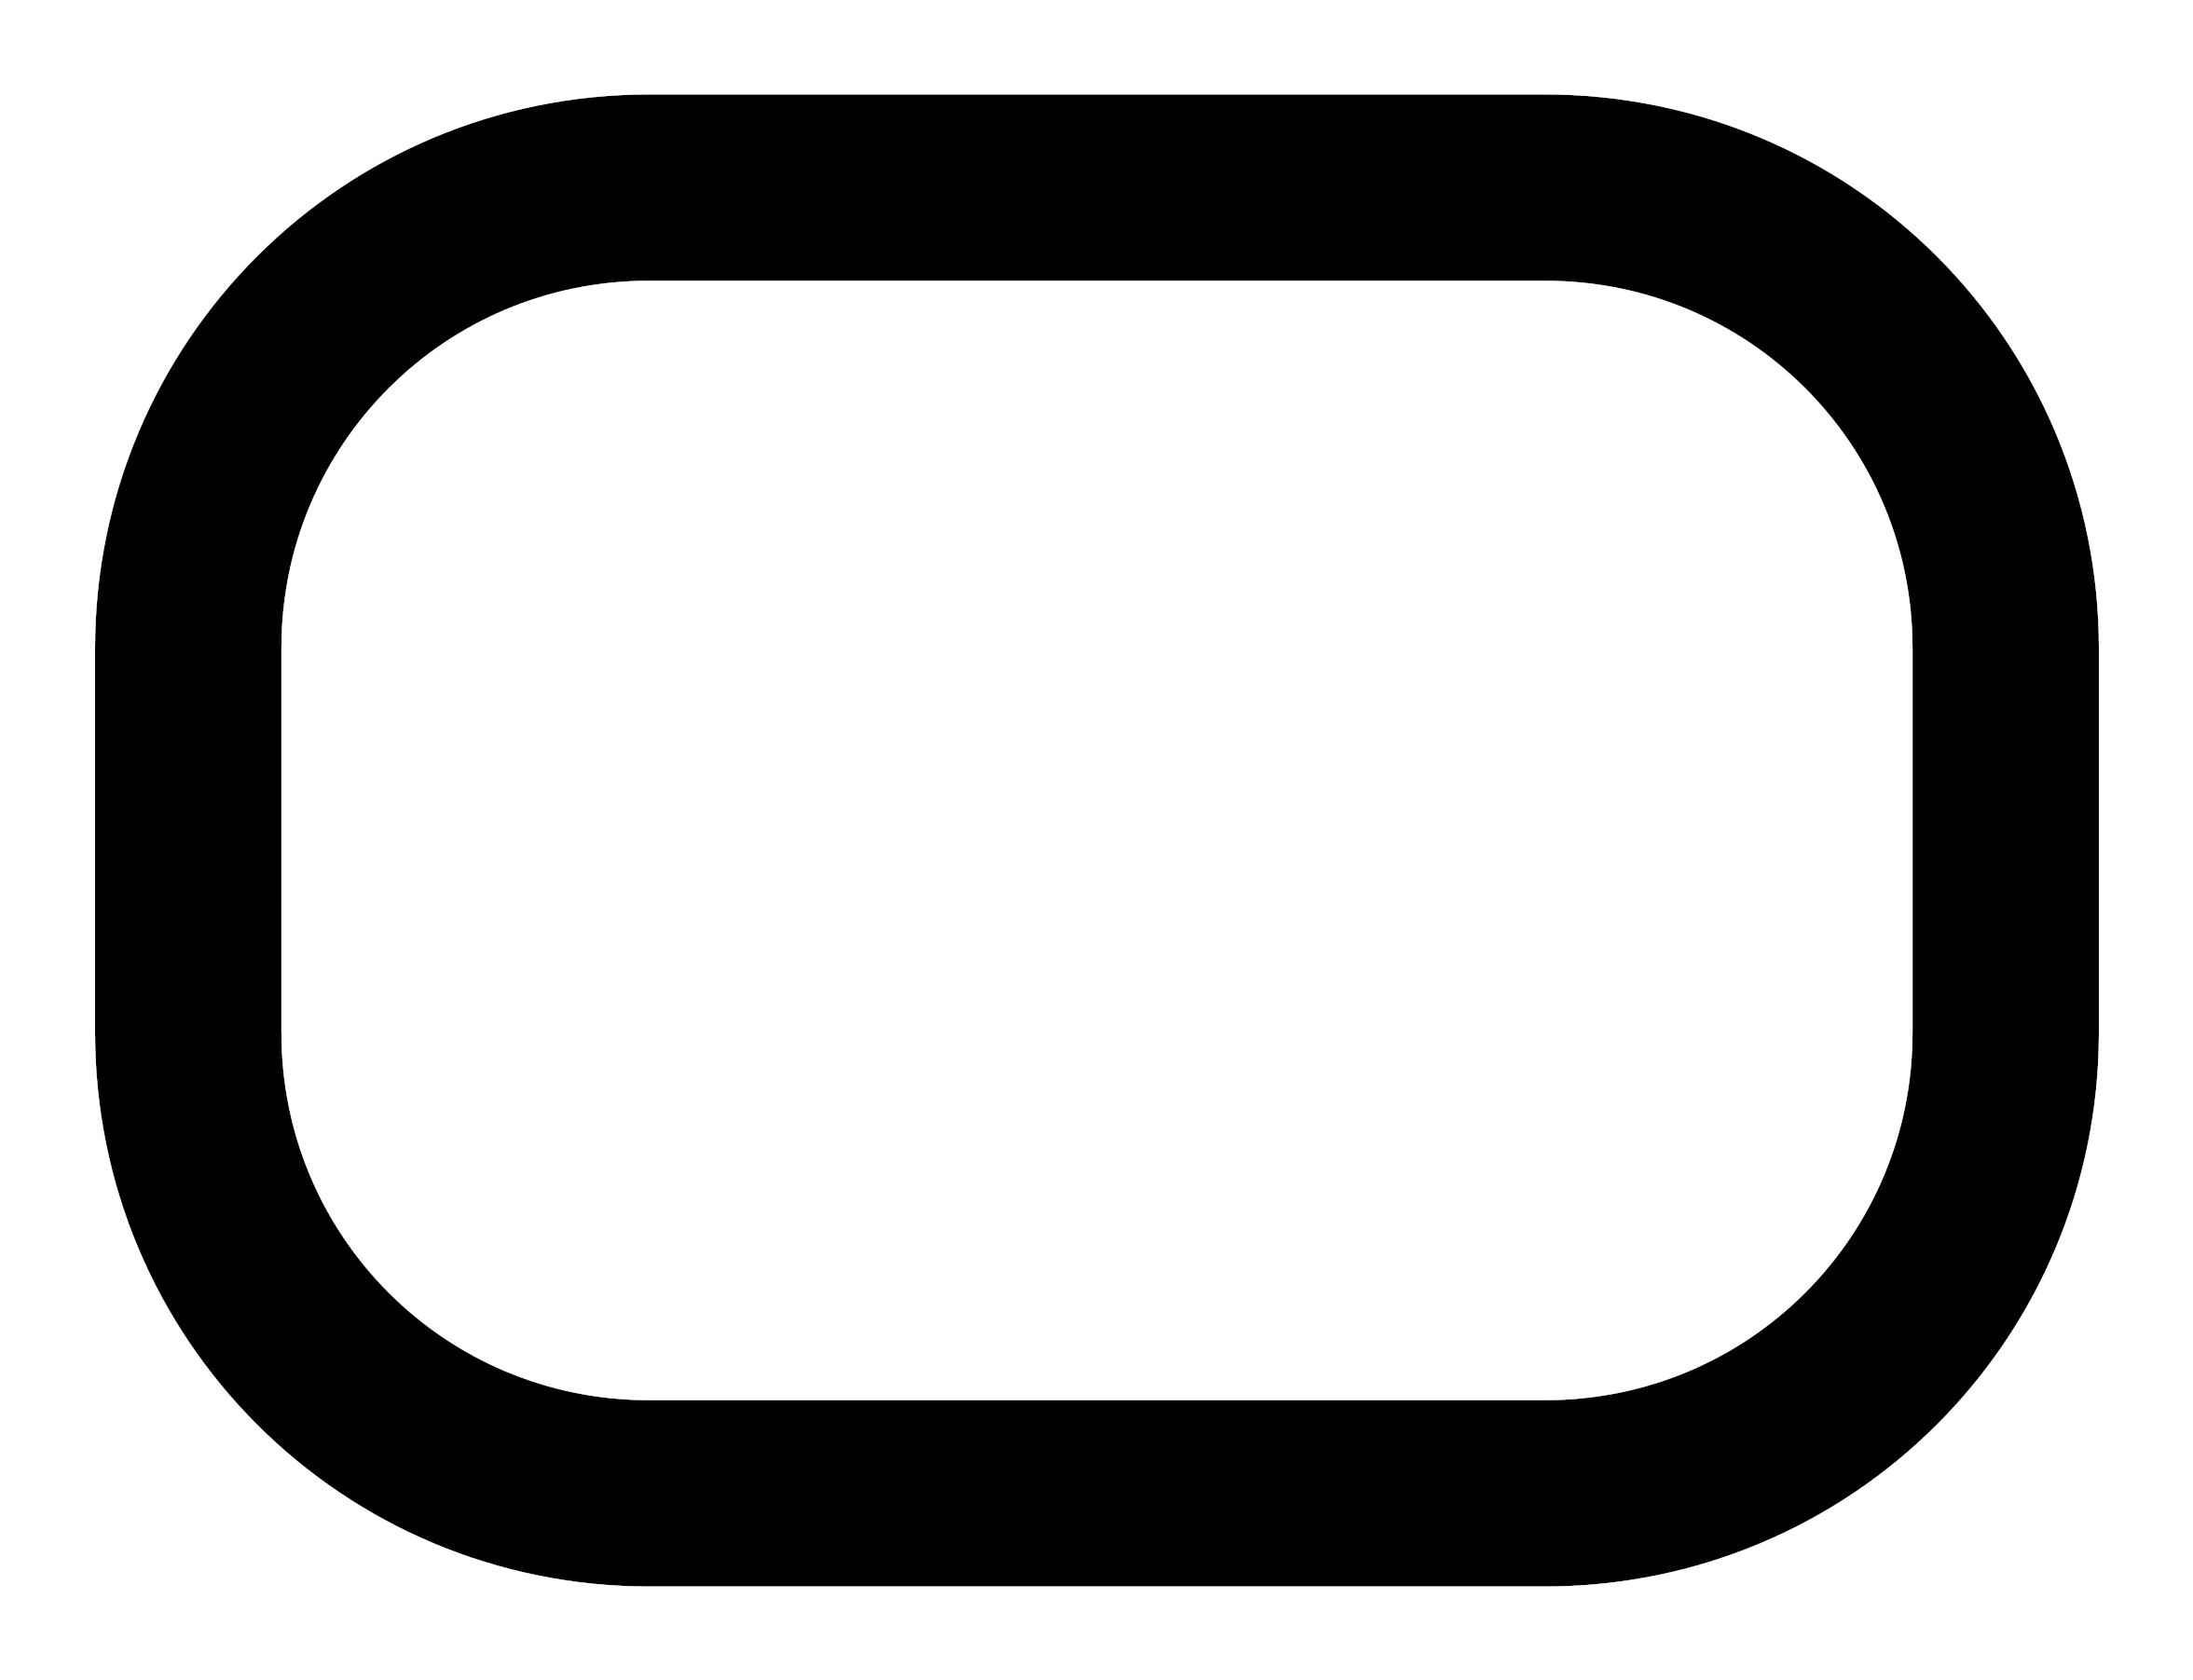 Rounded Rectangle Clip Art - Rounded Rectangle Clip Art (2400x2400)